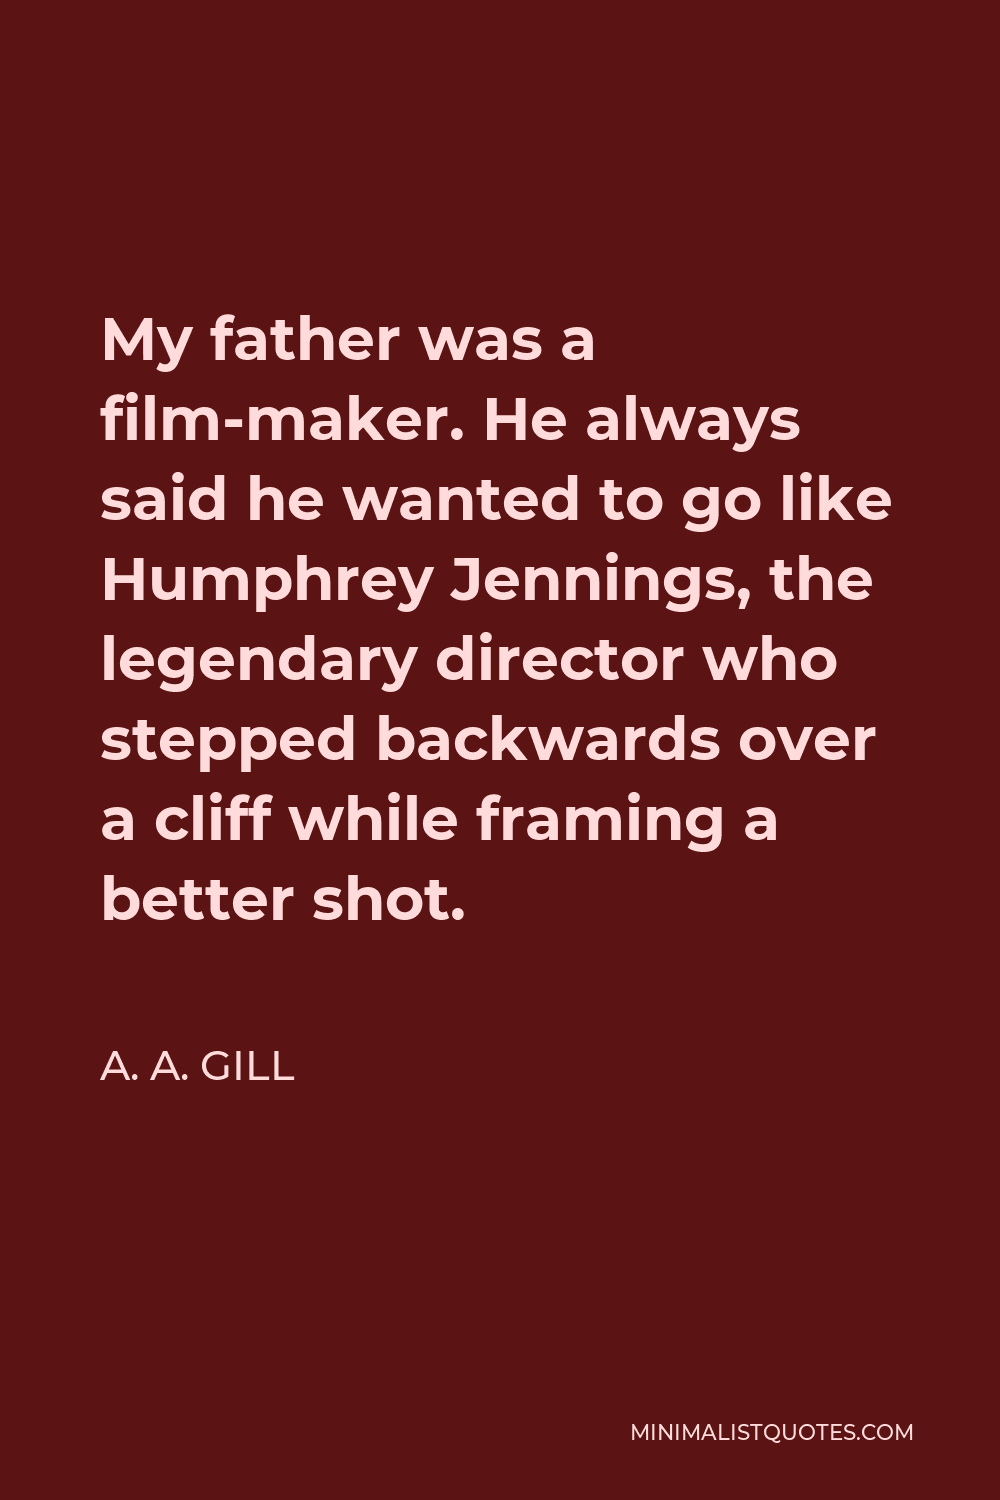 A. A. Gill Quote - My father was a film-maker. He always said he wanted to go like Humphrey Jennings, the legendary director who stepped backwards over a cliff while framing a better shot.